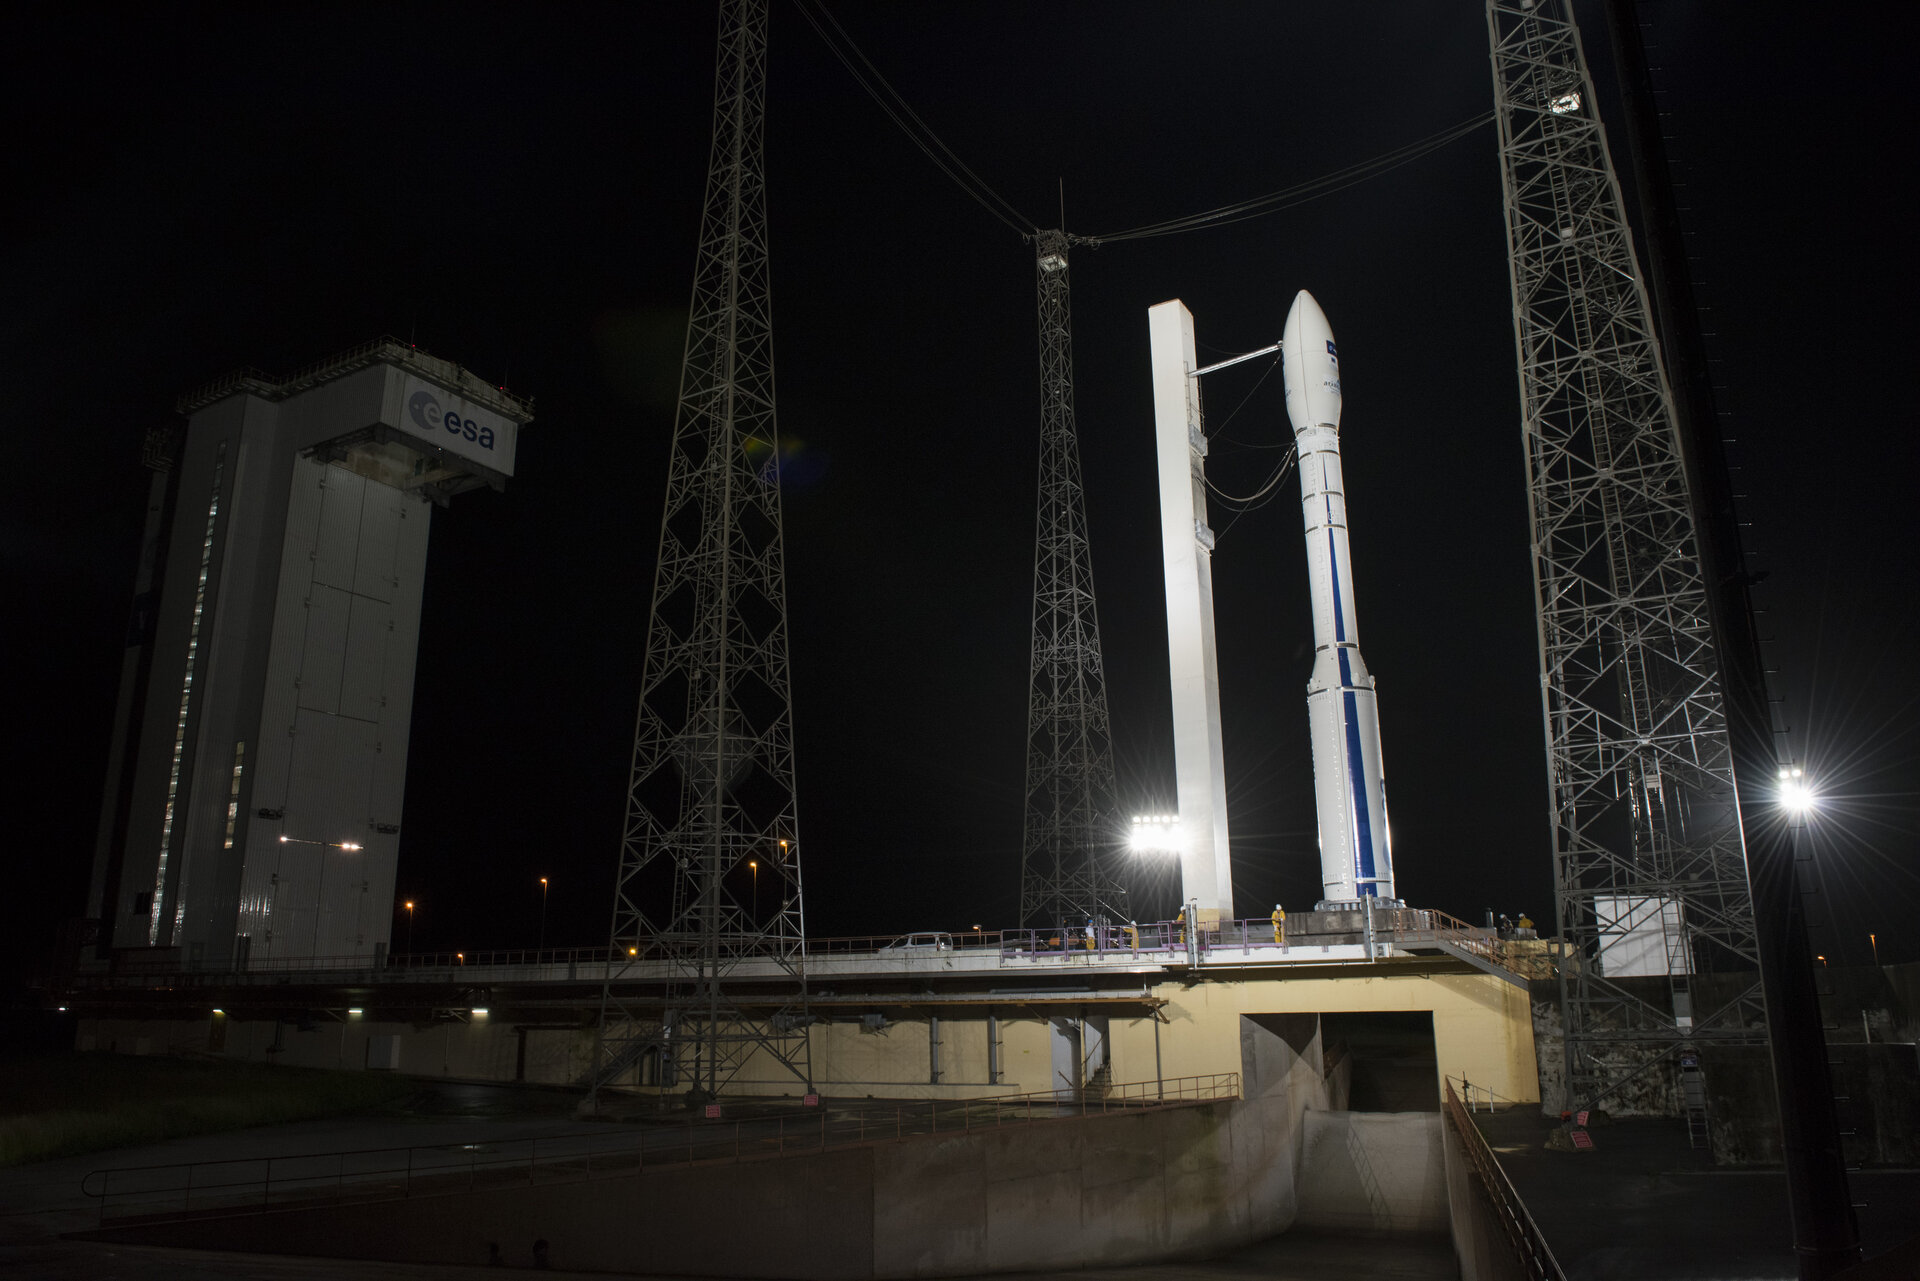 Vega and Sentinel-2B ready on the launch pad